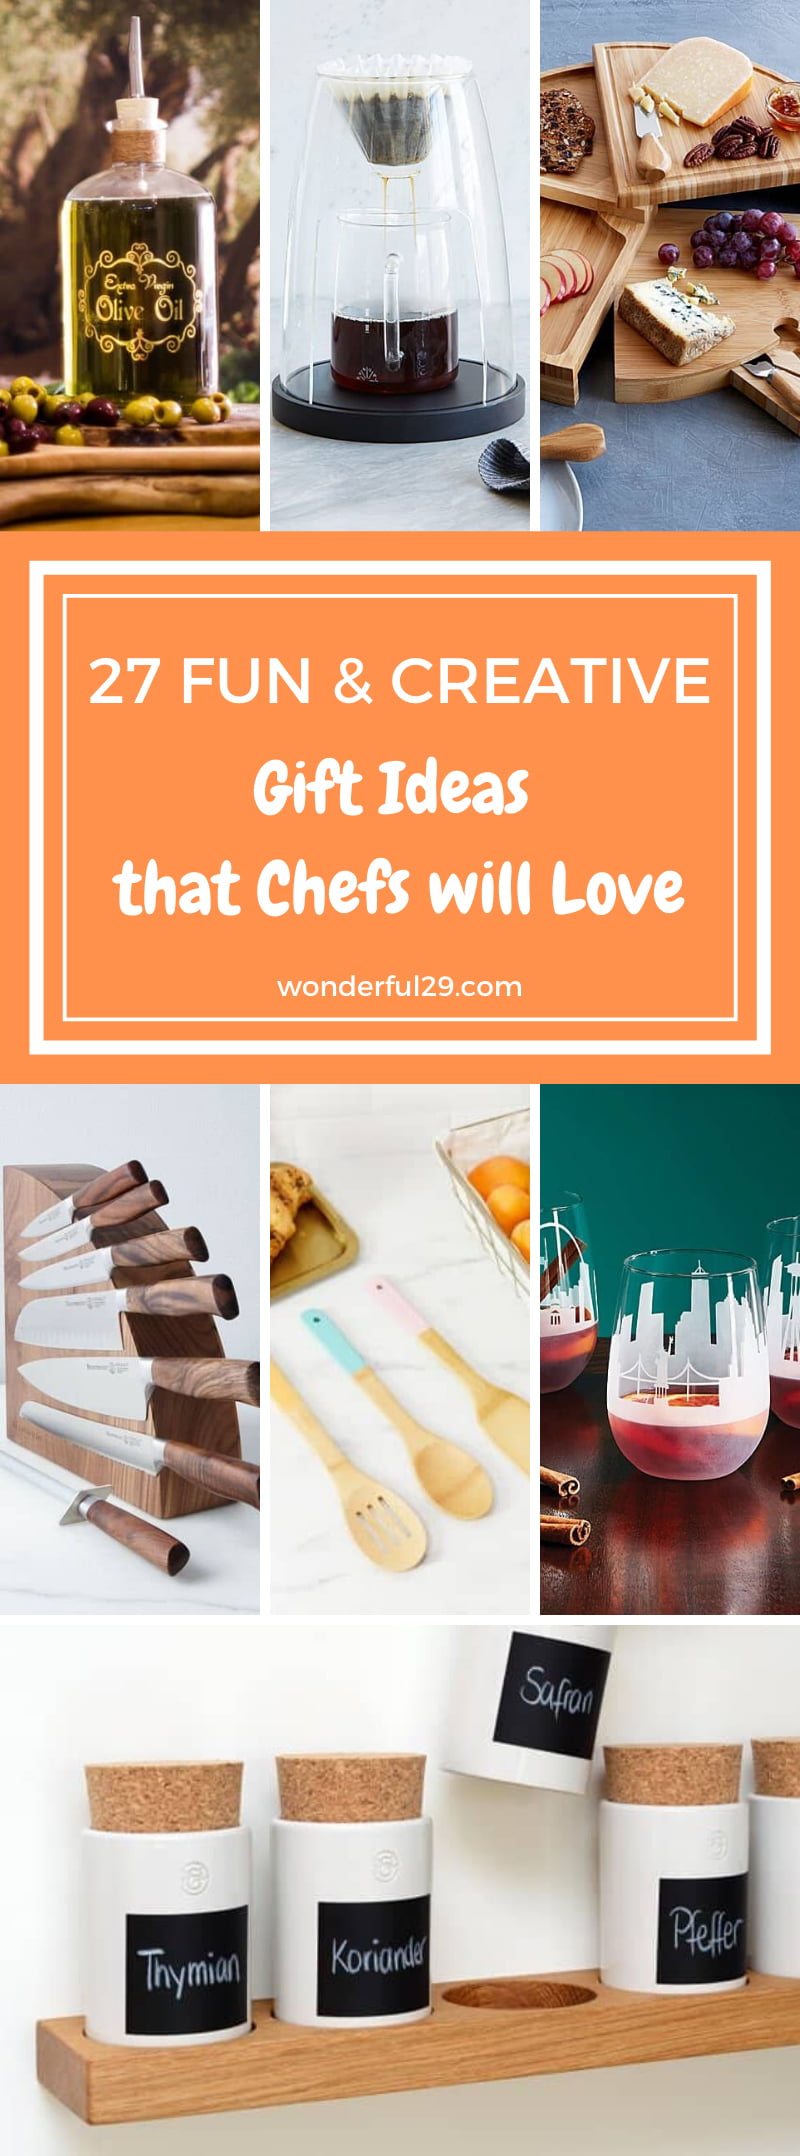 Best Gifts for Chefs | Foodie gifts, Best housewarming gifts, Chef gifts